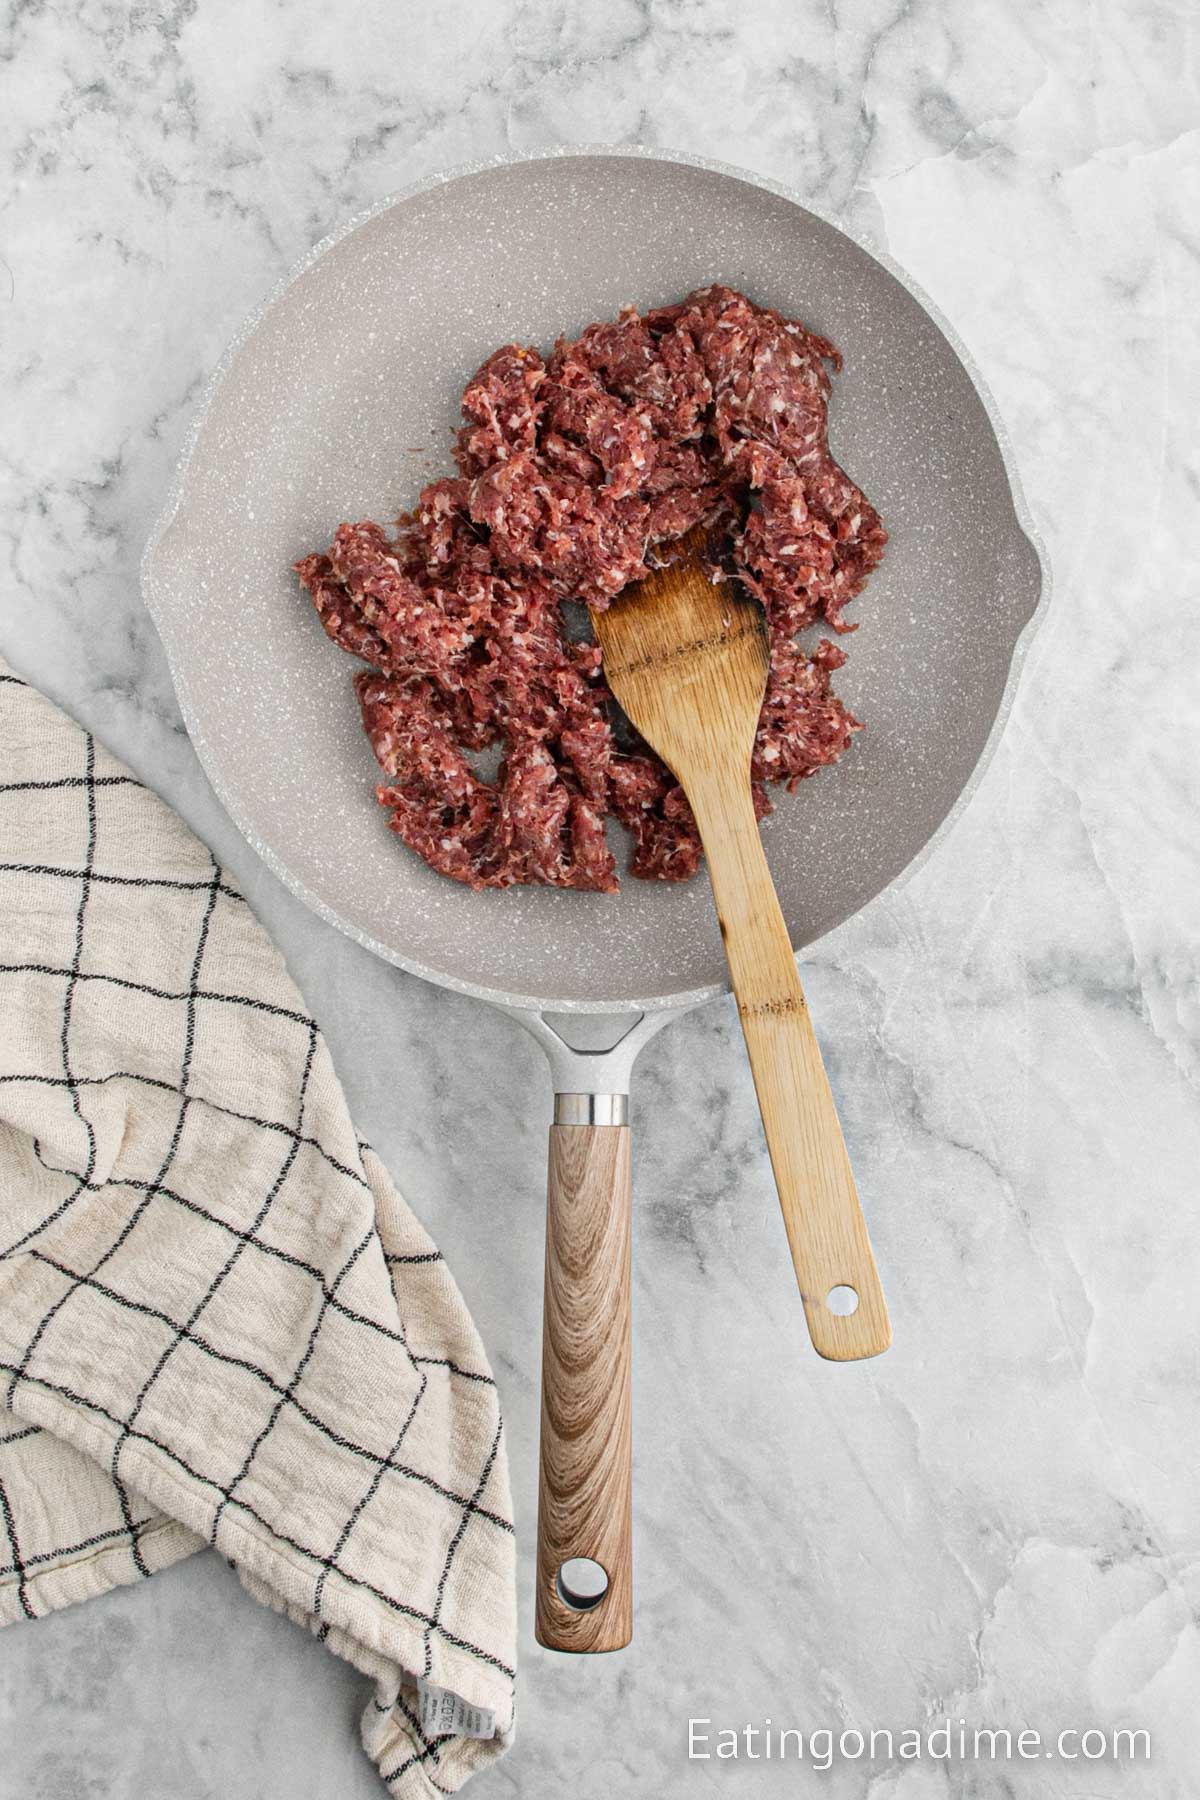 Cooking the ground sausage in a skillet with a wooden spoon